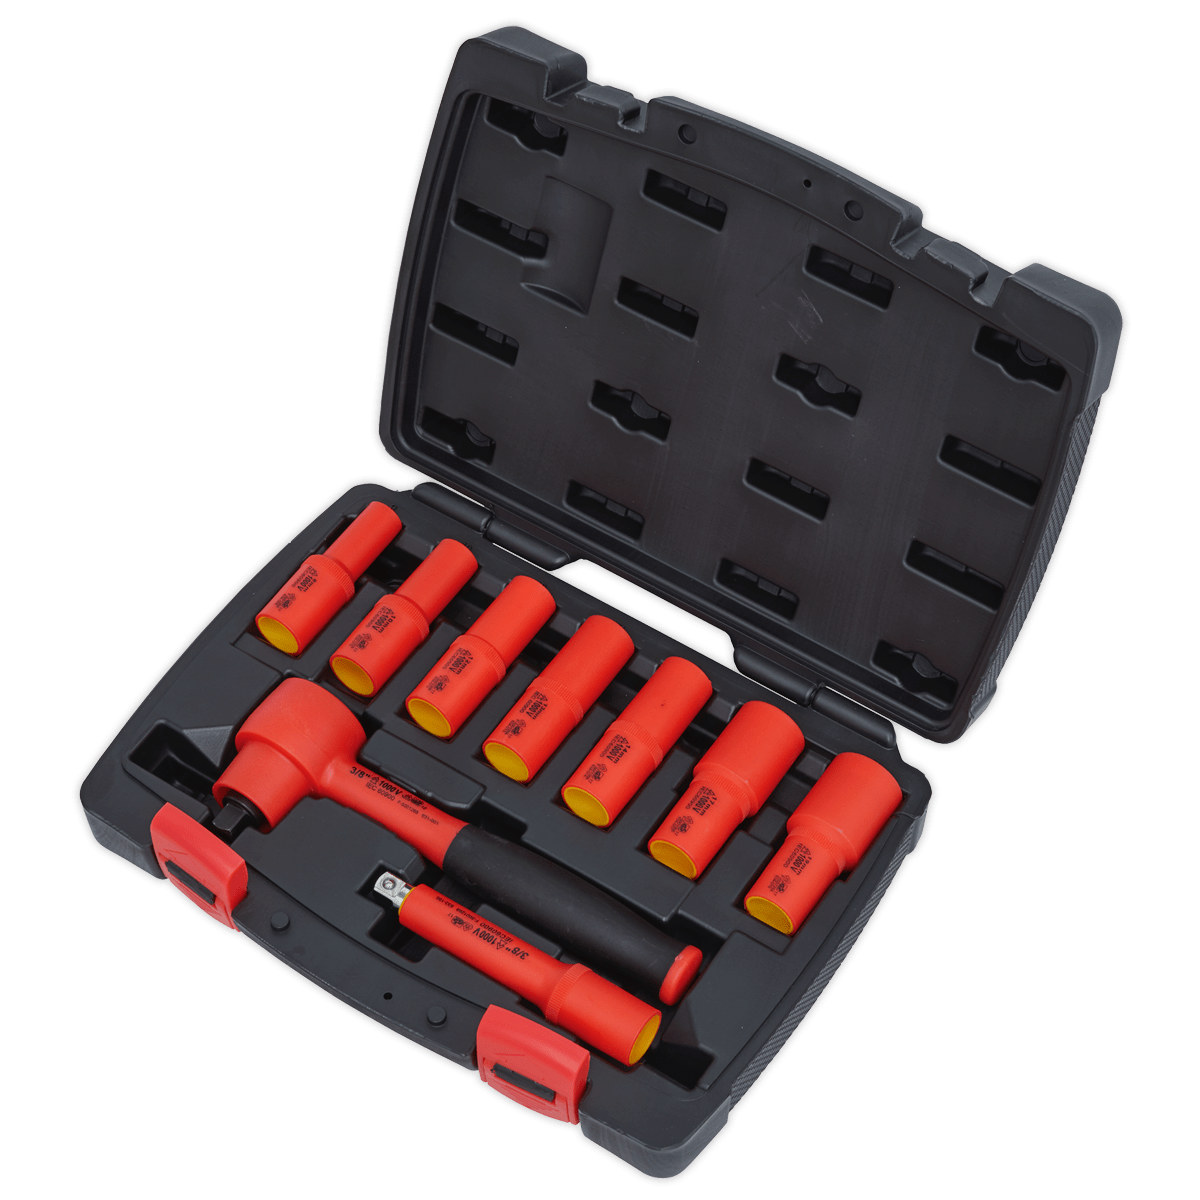 Insulated Socket Set 9pc 3/8"Sq Drive 6pt WallDrive¨ VDE Approved | Hardened and tempered Chrome Vanadium steel sockets and accessories. | toolforce.ie